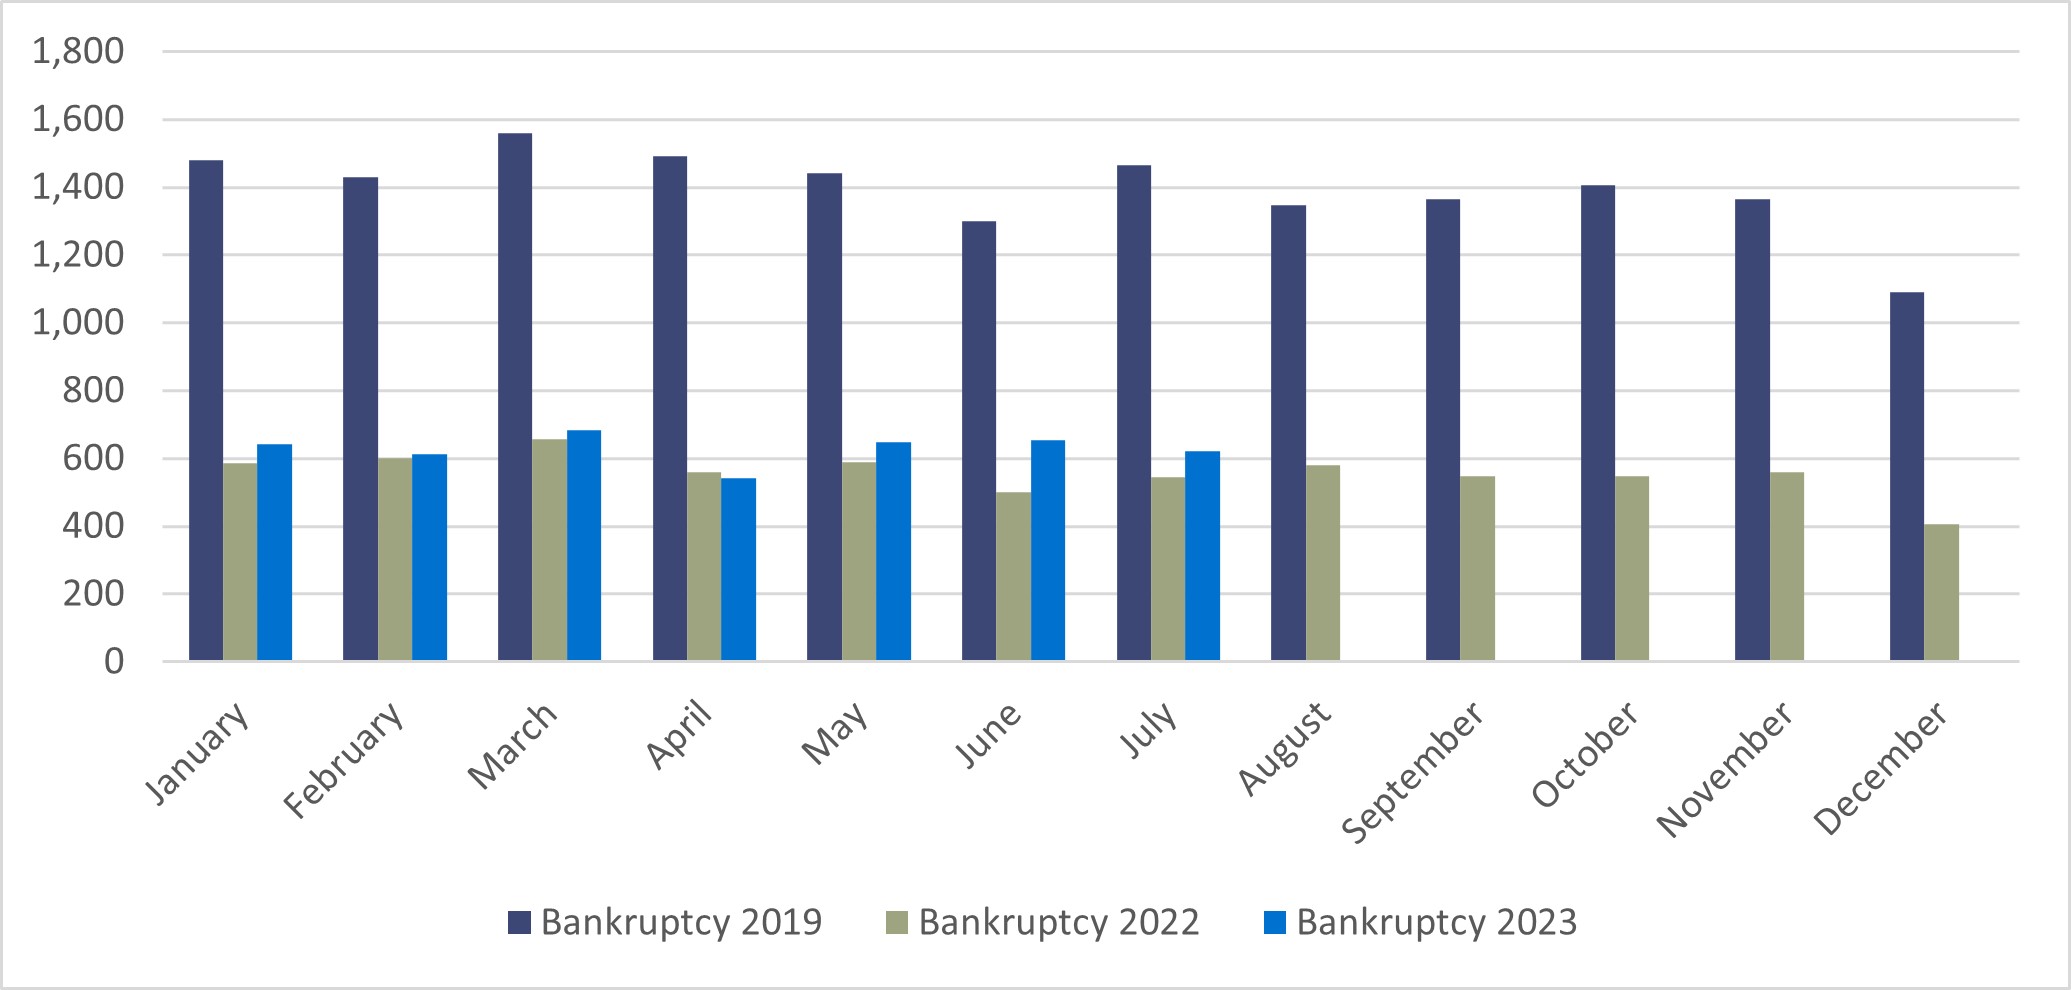 Bankruptcy-England-and-Wales (July 23)